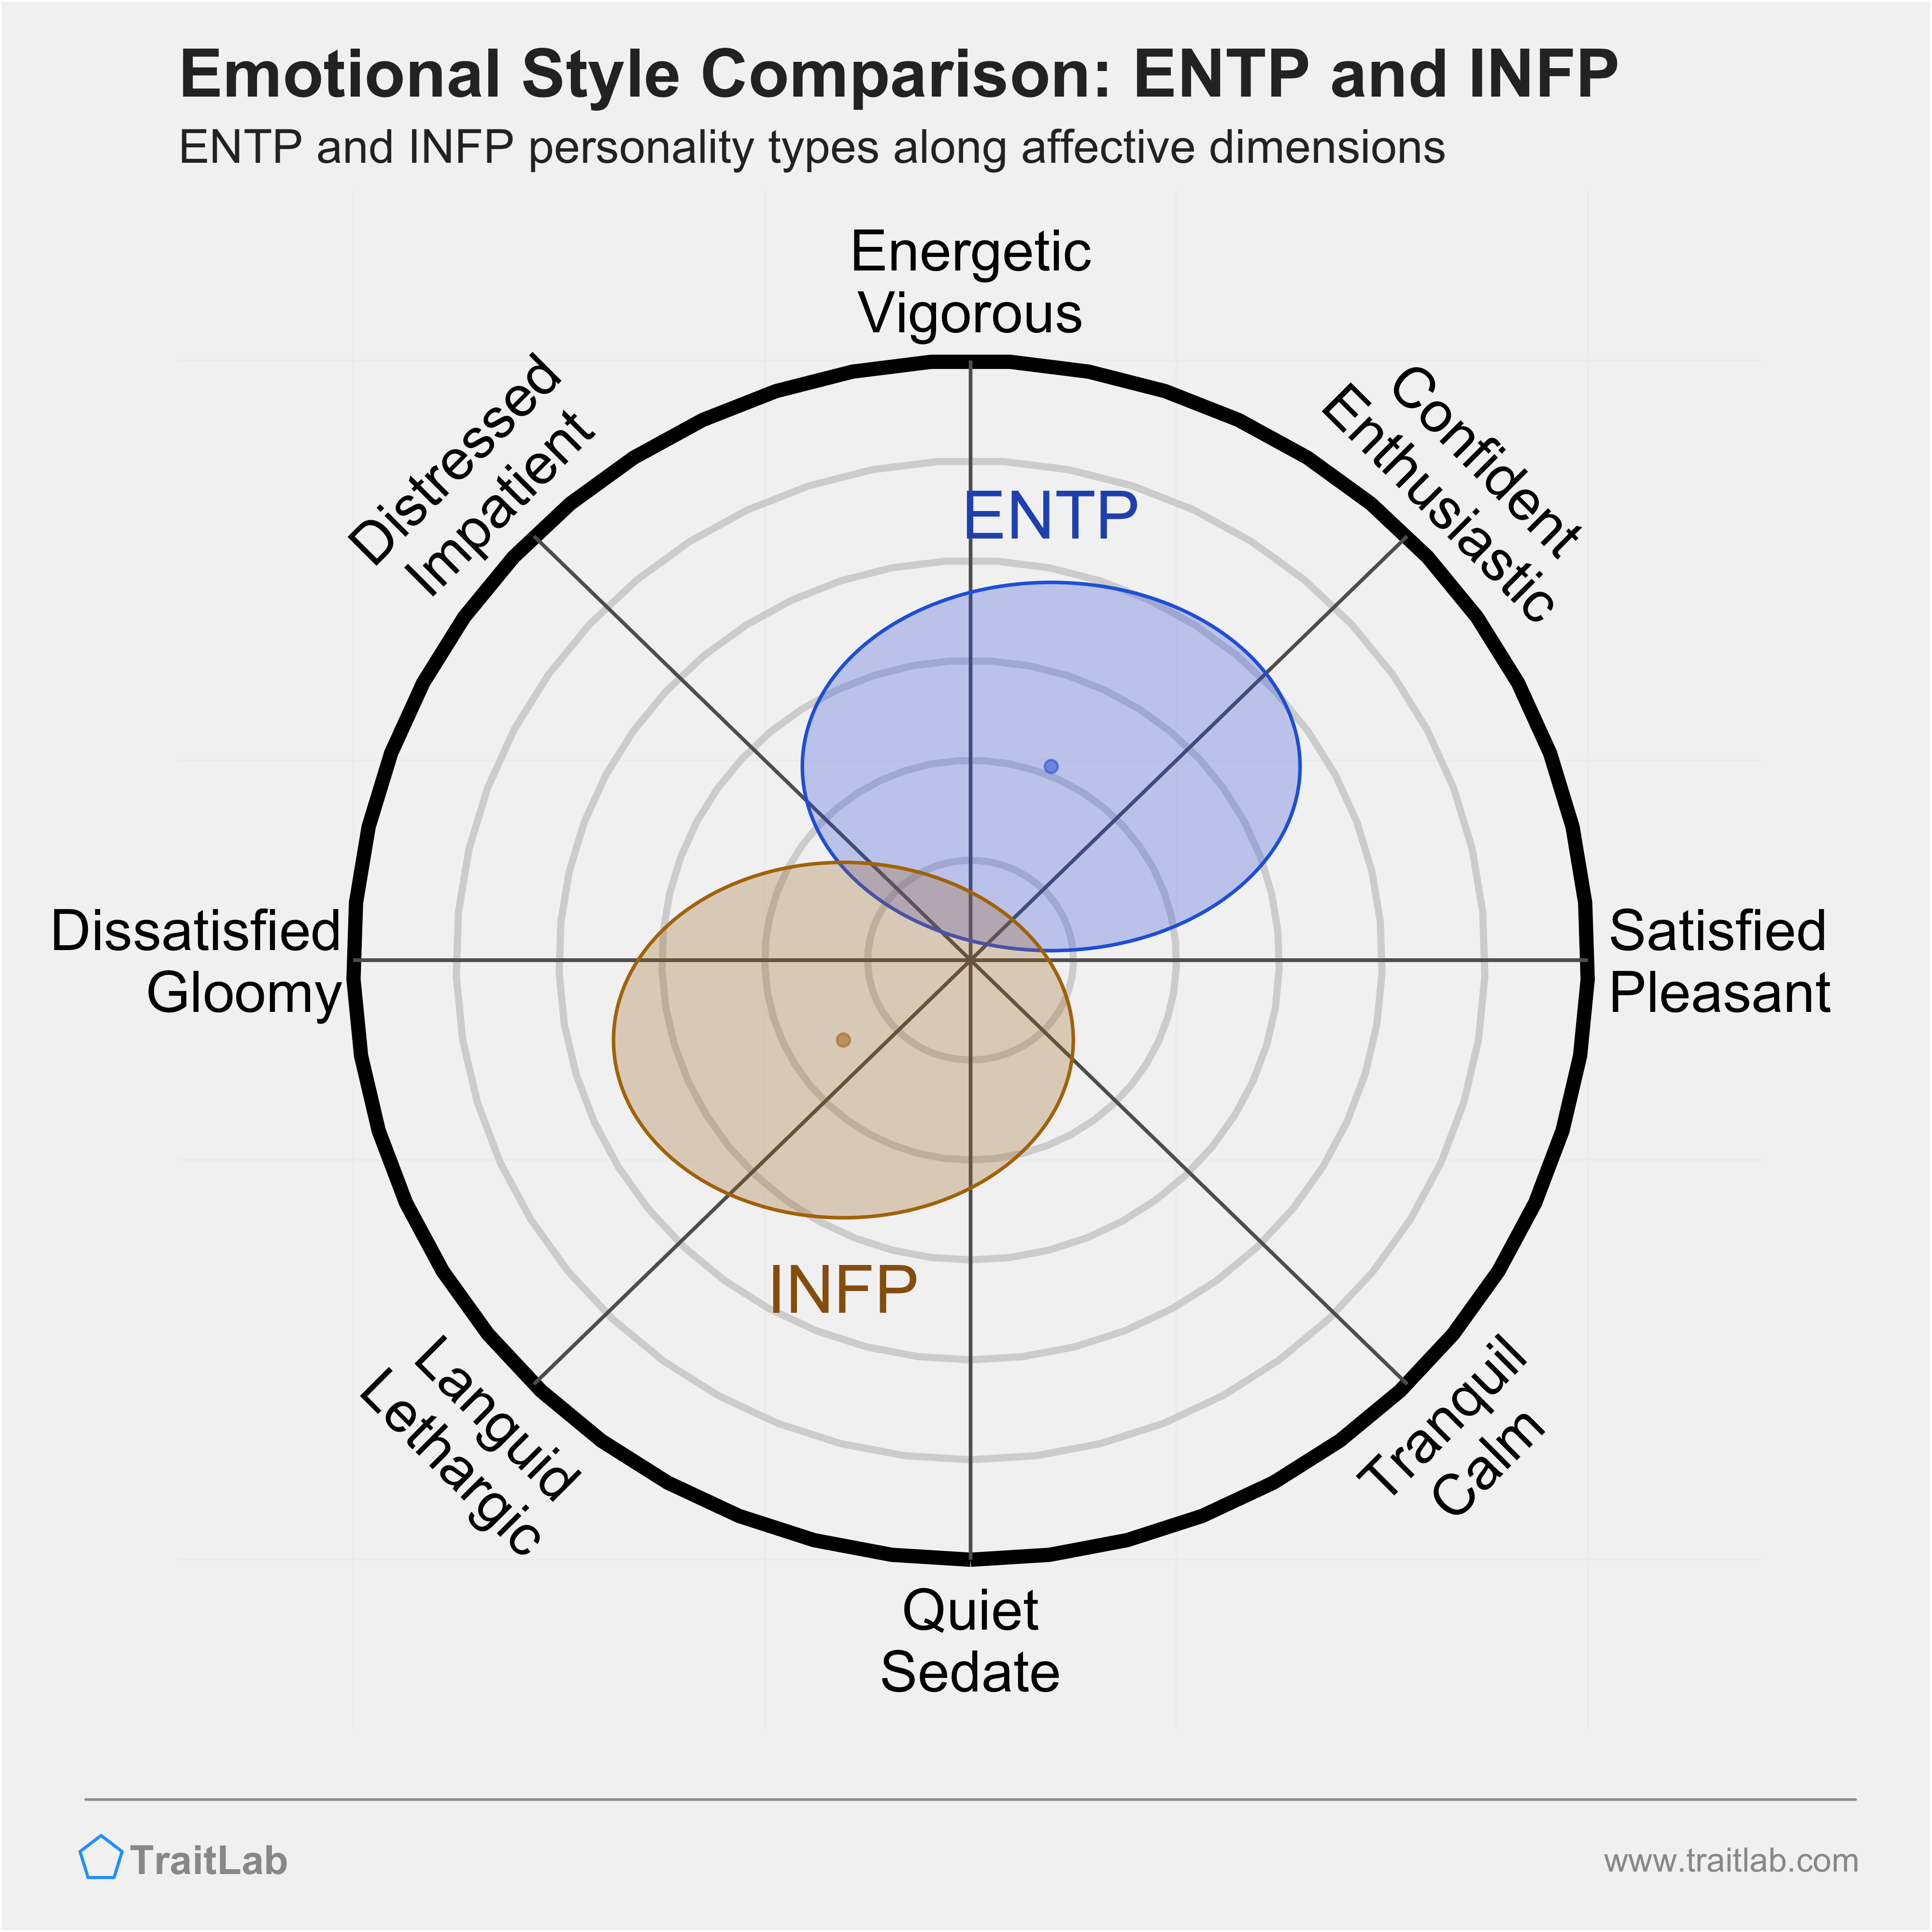 ENTP and INFP comparison across emotional (affective) dimensions